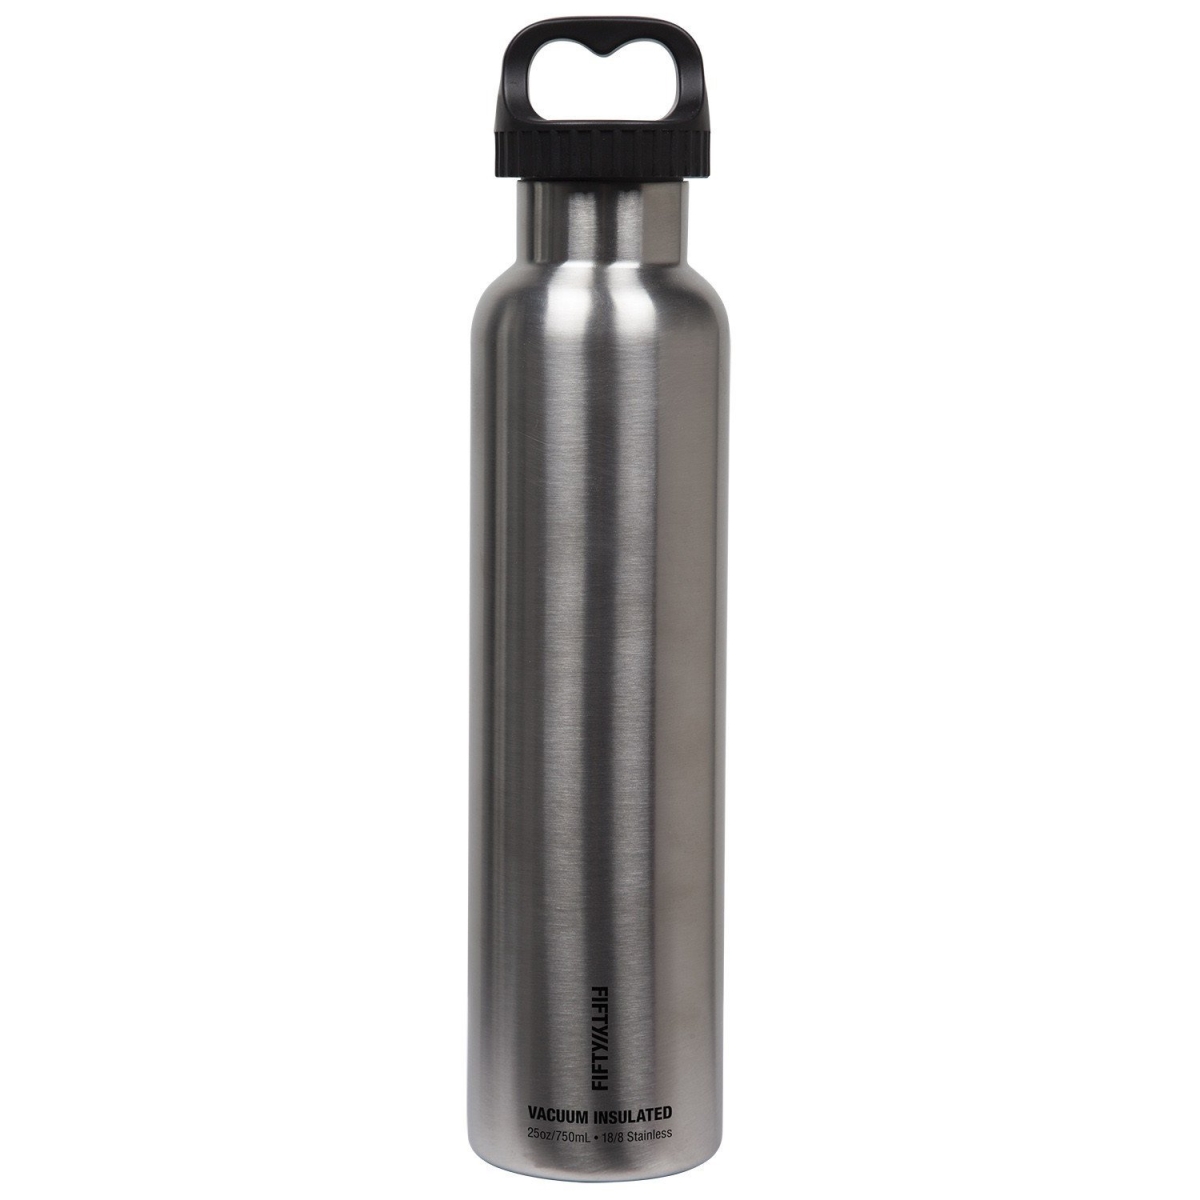 V25003ss0 25 Oz Double-wall Vacuum-insulated Bottles With 2 Finger Grip Cap - Stainless Steel